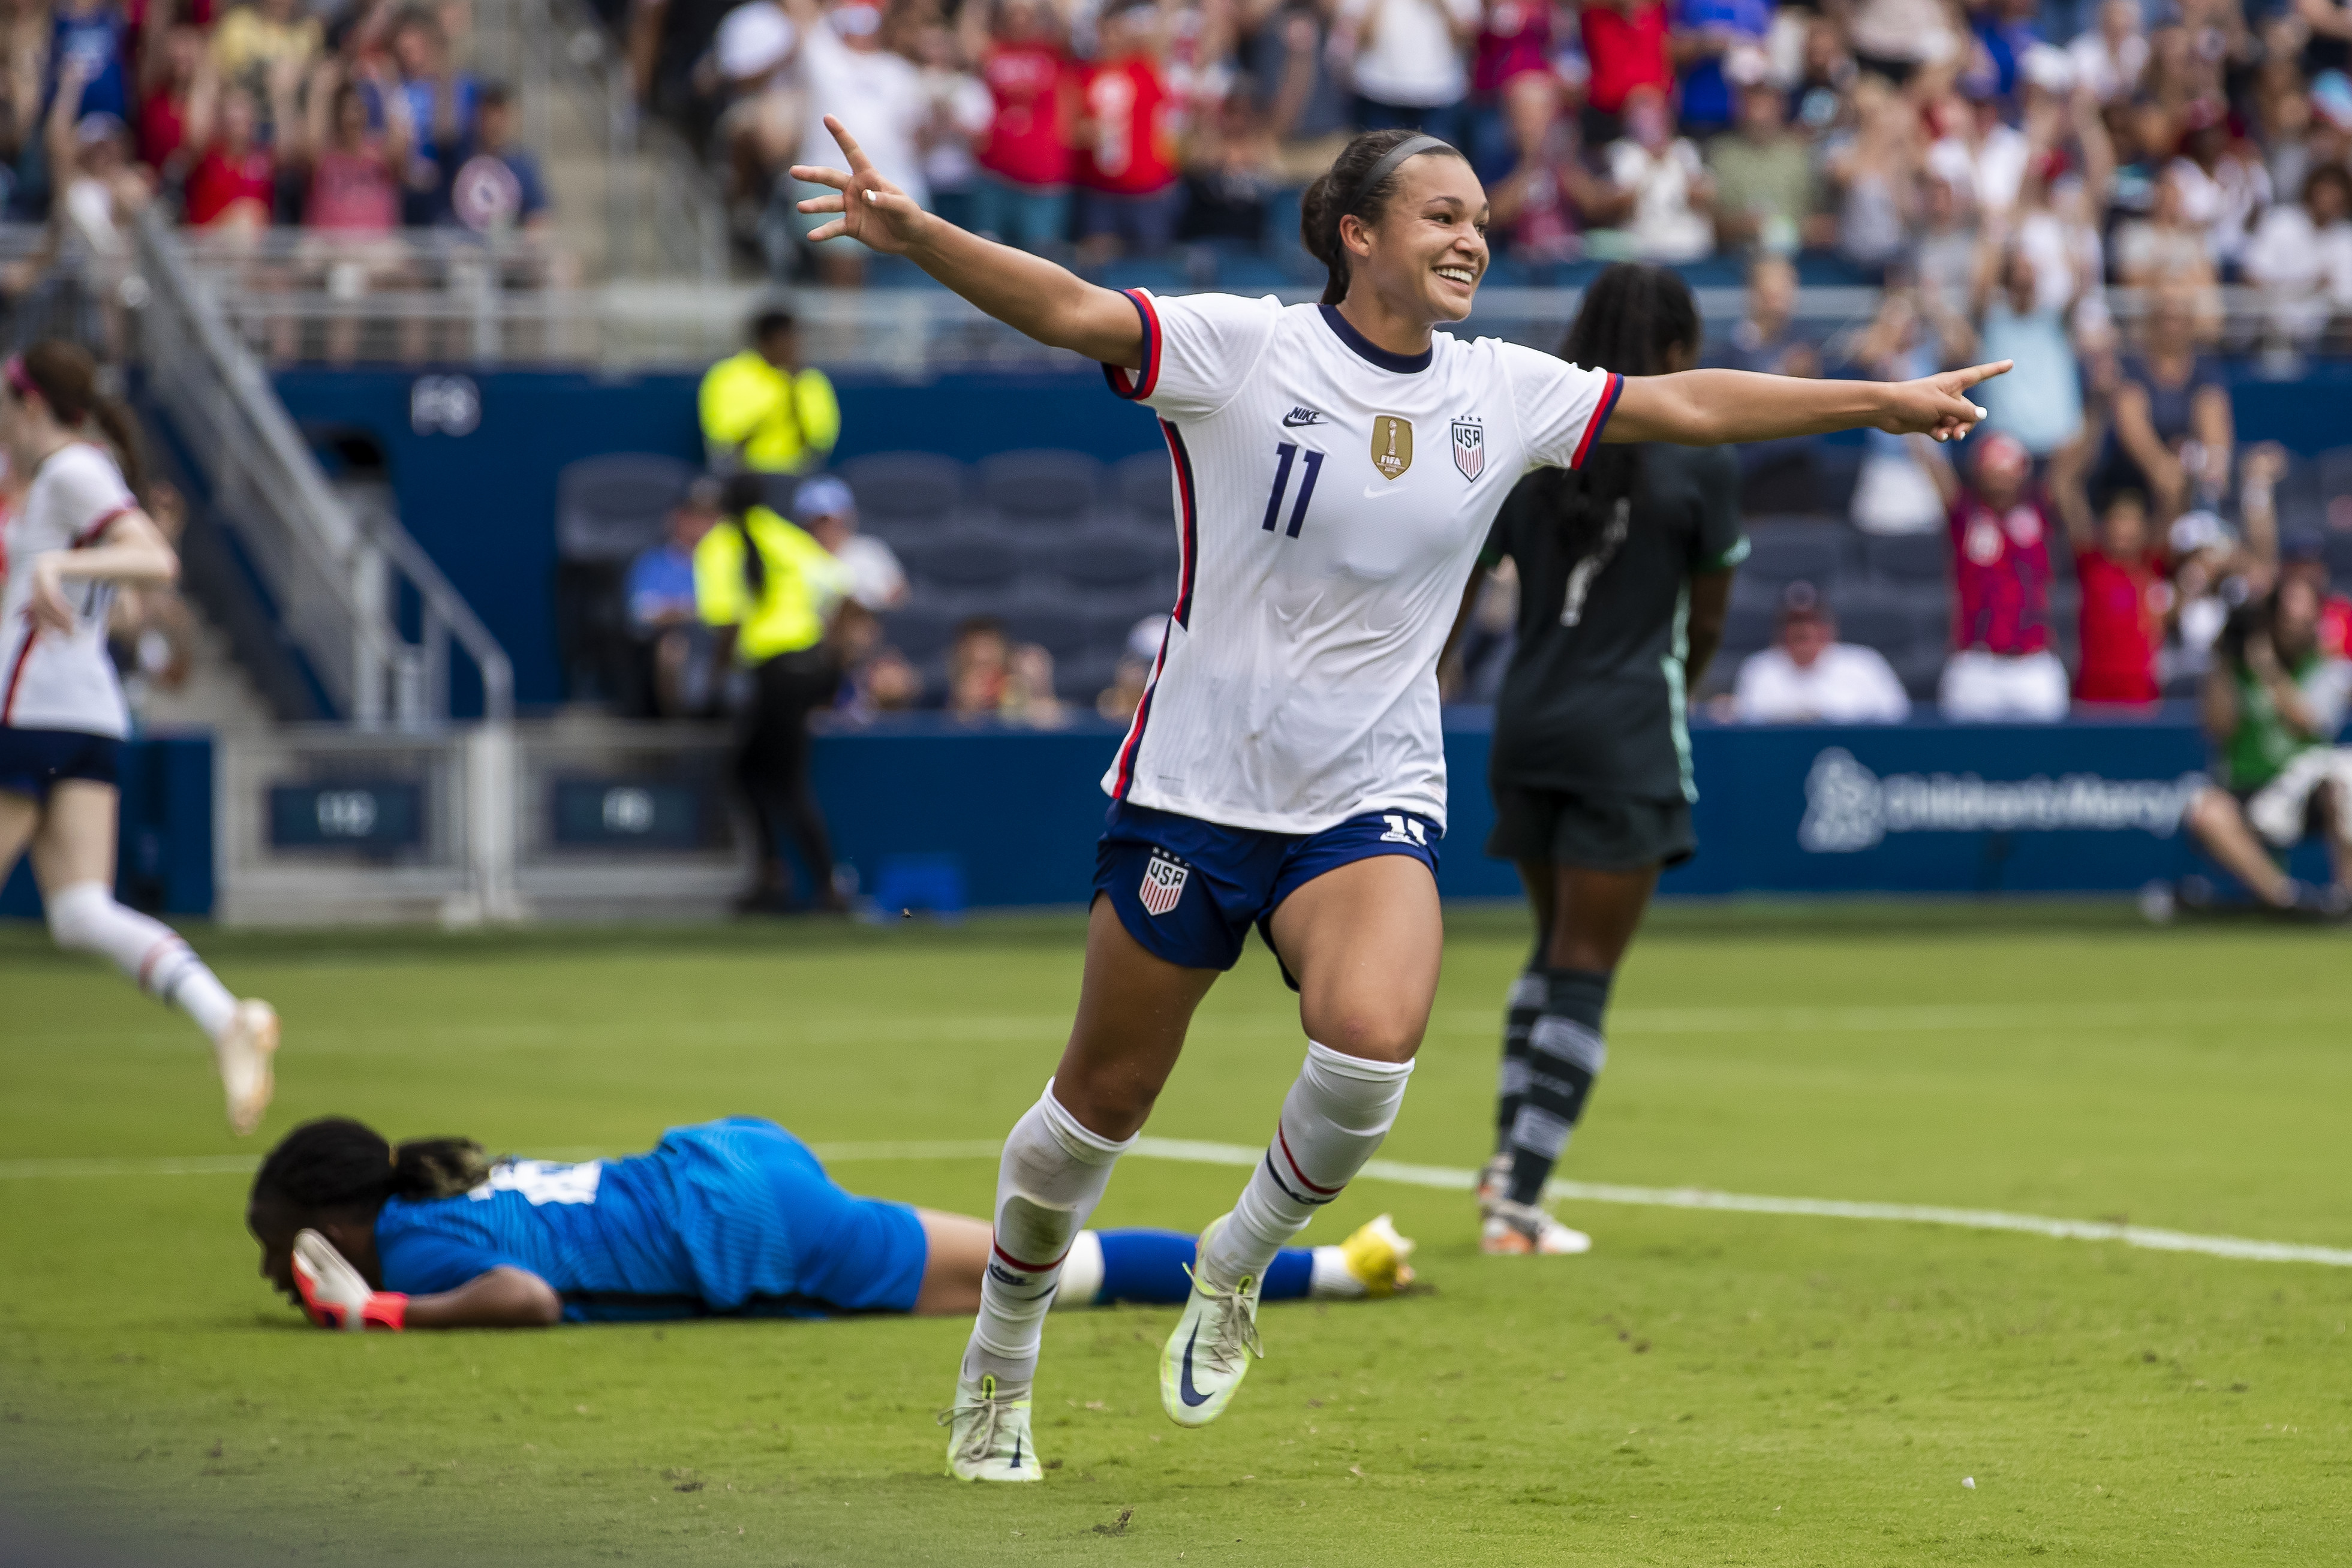 Outside World Cup, women pro soccer players struggle to make ends